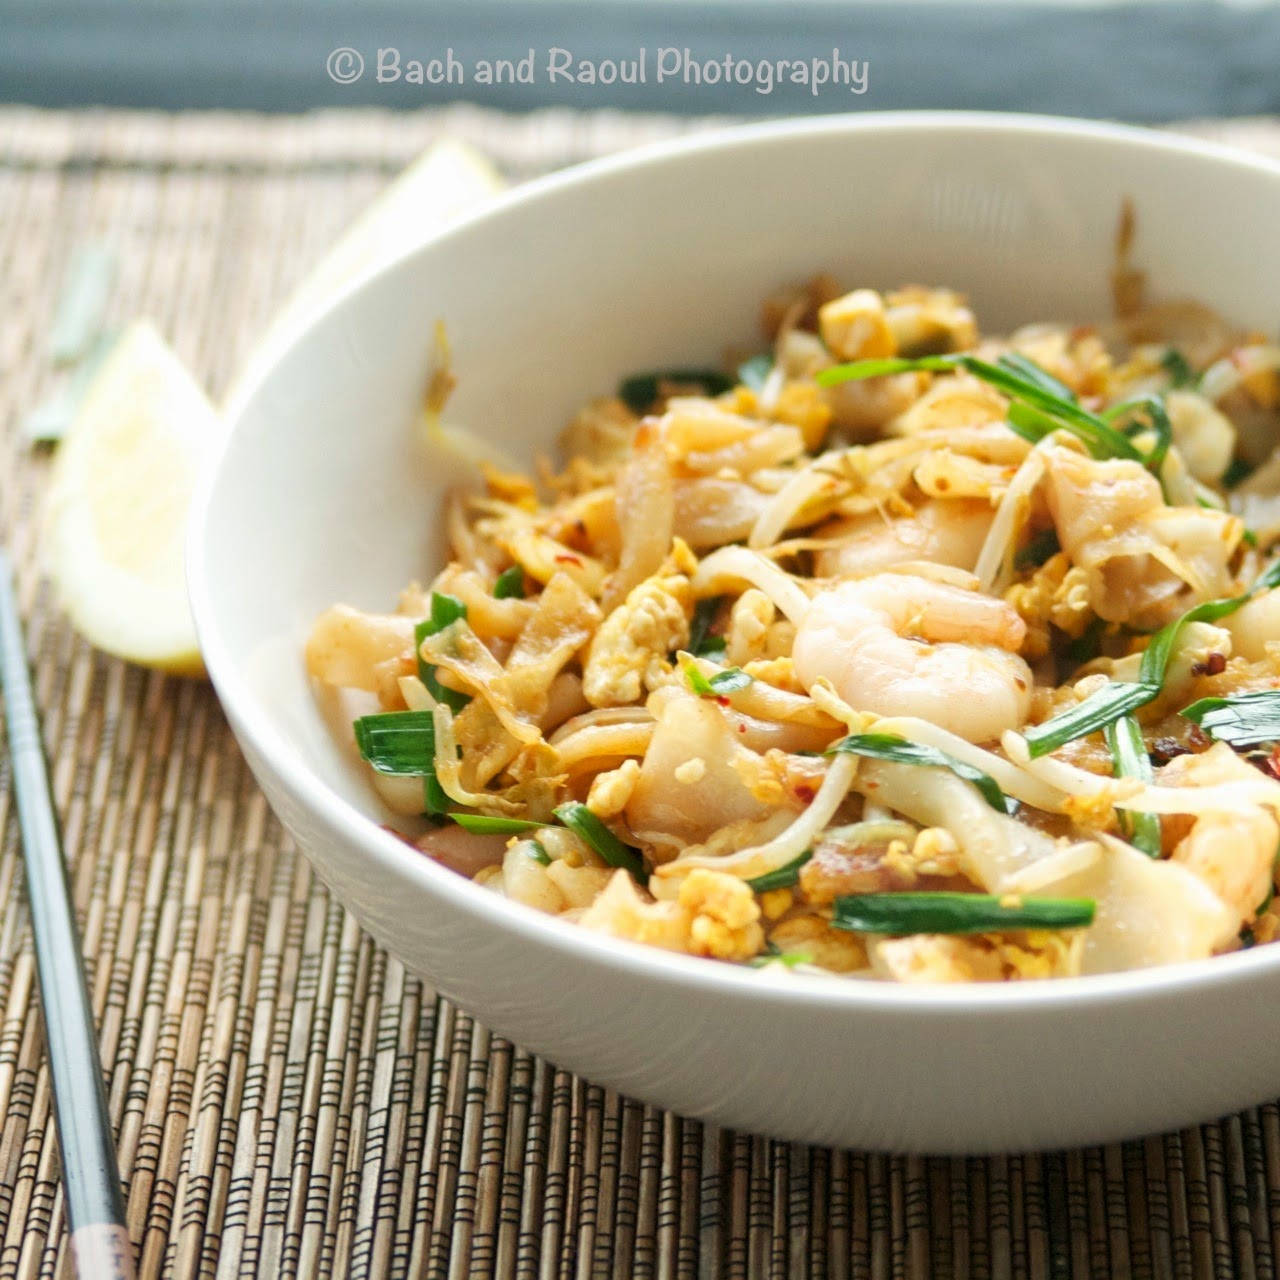 Char Kway Teow - Malayasian Stir Fried Rice Noodles with Shrimp and Garlic Chives